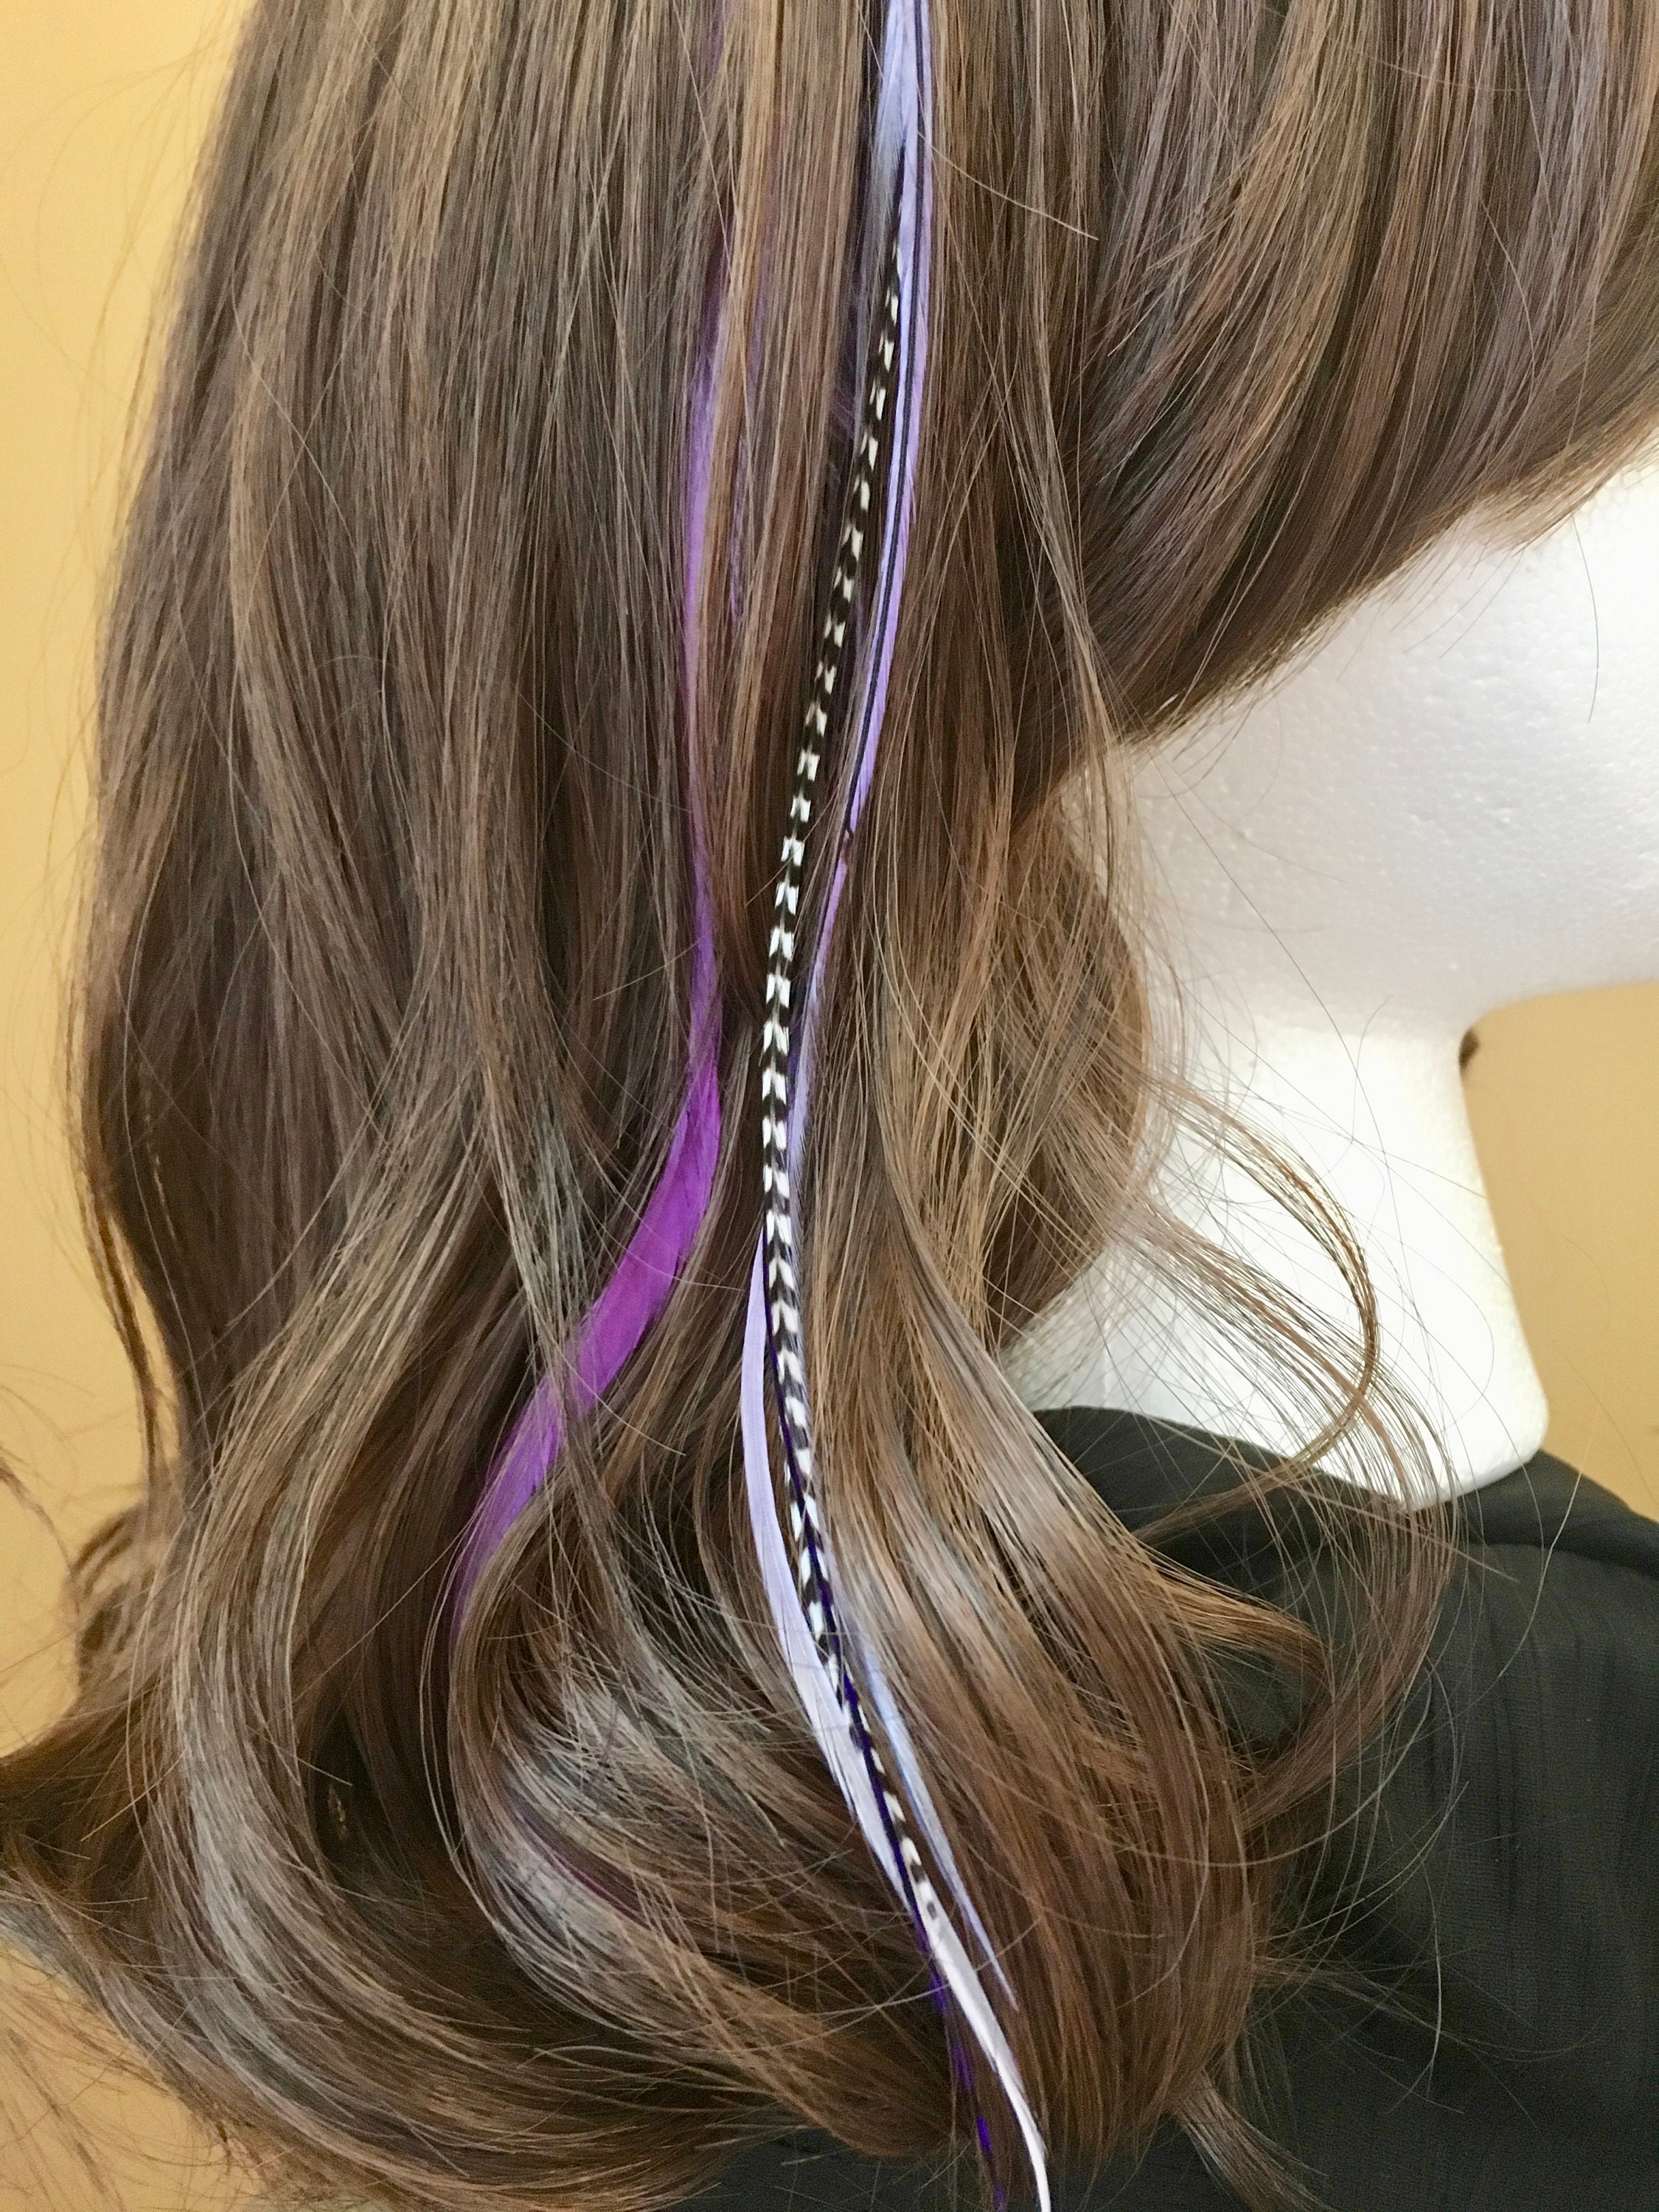 Feather Hair Extensions are Here! - Planet Hair - Wichita's Most